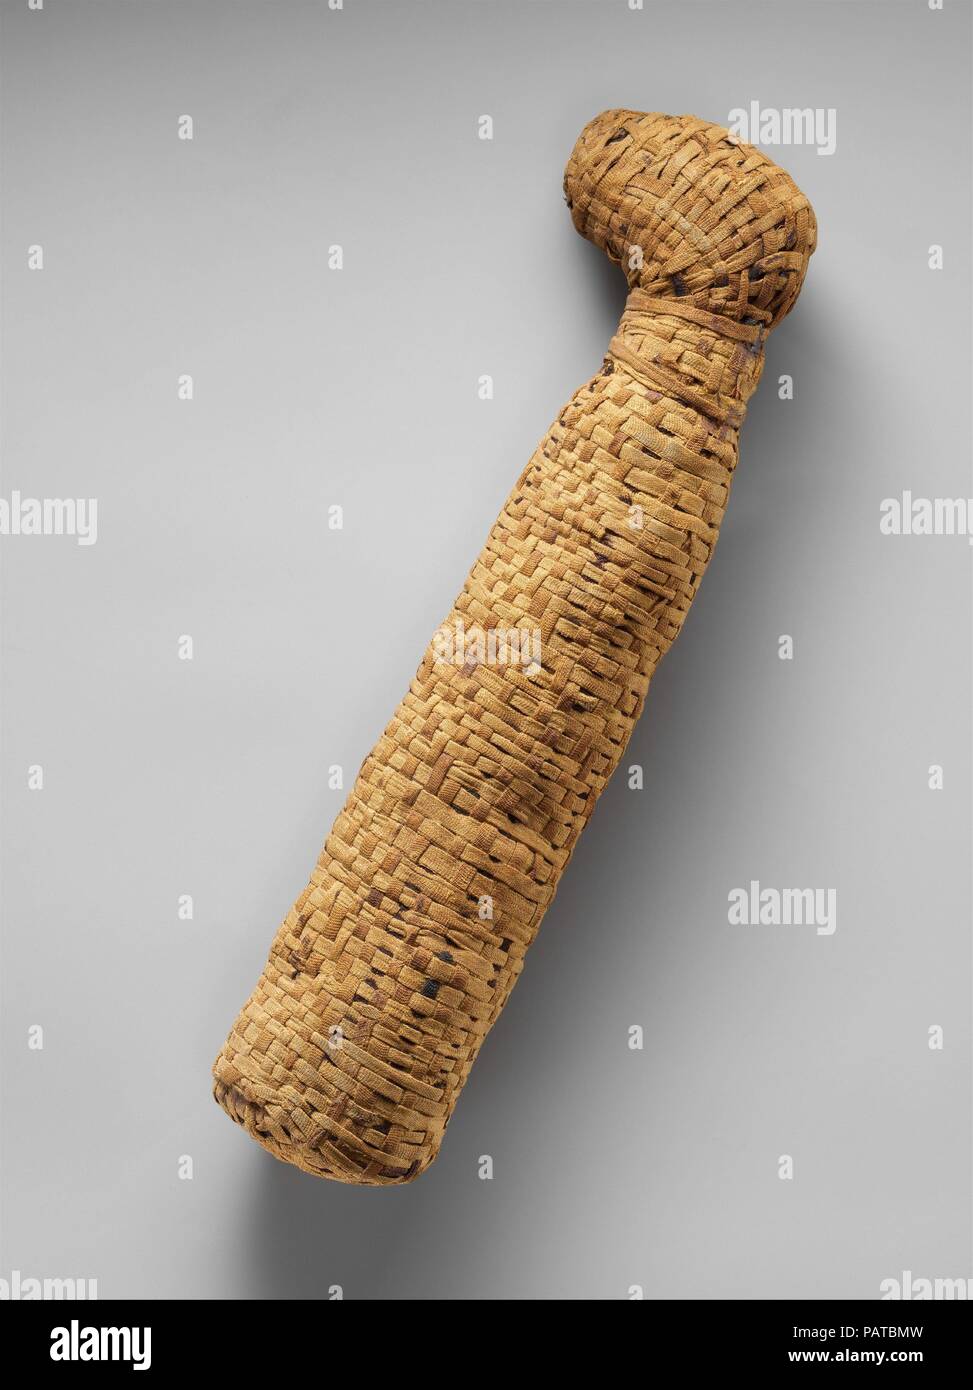 Sacred animal mummy of a cat. Dimensions: H. 34.4 cm (13 9/16 in.); W. 9.5 cm (3 3/4 in.); D. 5.6 cm (2 3/16 in.). Date: ca. 400 B.C.-100 A.D..  Animal cults   The Egyptians considered certain individual animals to be living manifestations of a god, such as, since earliest times, the Apis bull . Those individuals were duly mummifed when they died and buried for eternal life, then replaced by another single living manifestation. During the first millennium BC, many multiples of animals associated with certain gods were specially raised in temple precincts as simultaneous avatars of that god and Stock Photo